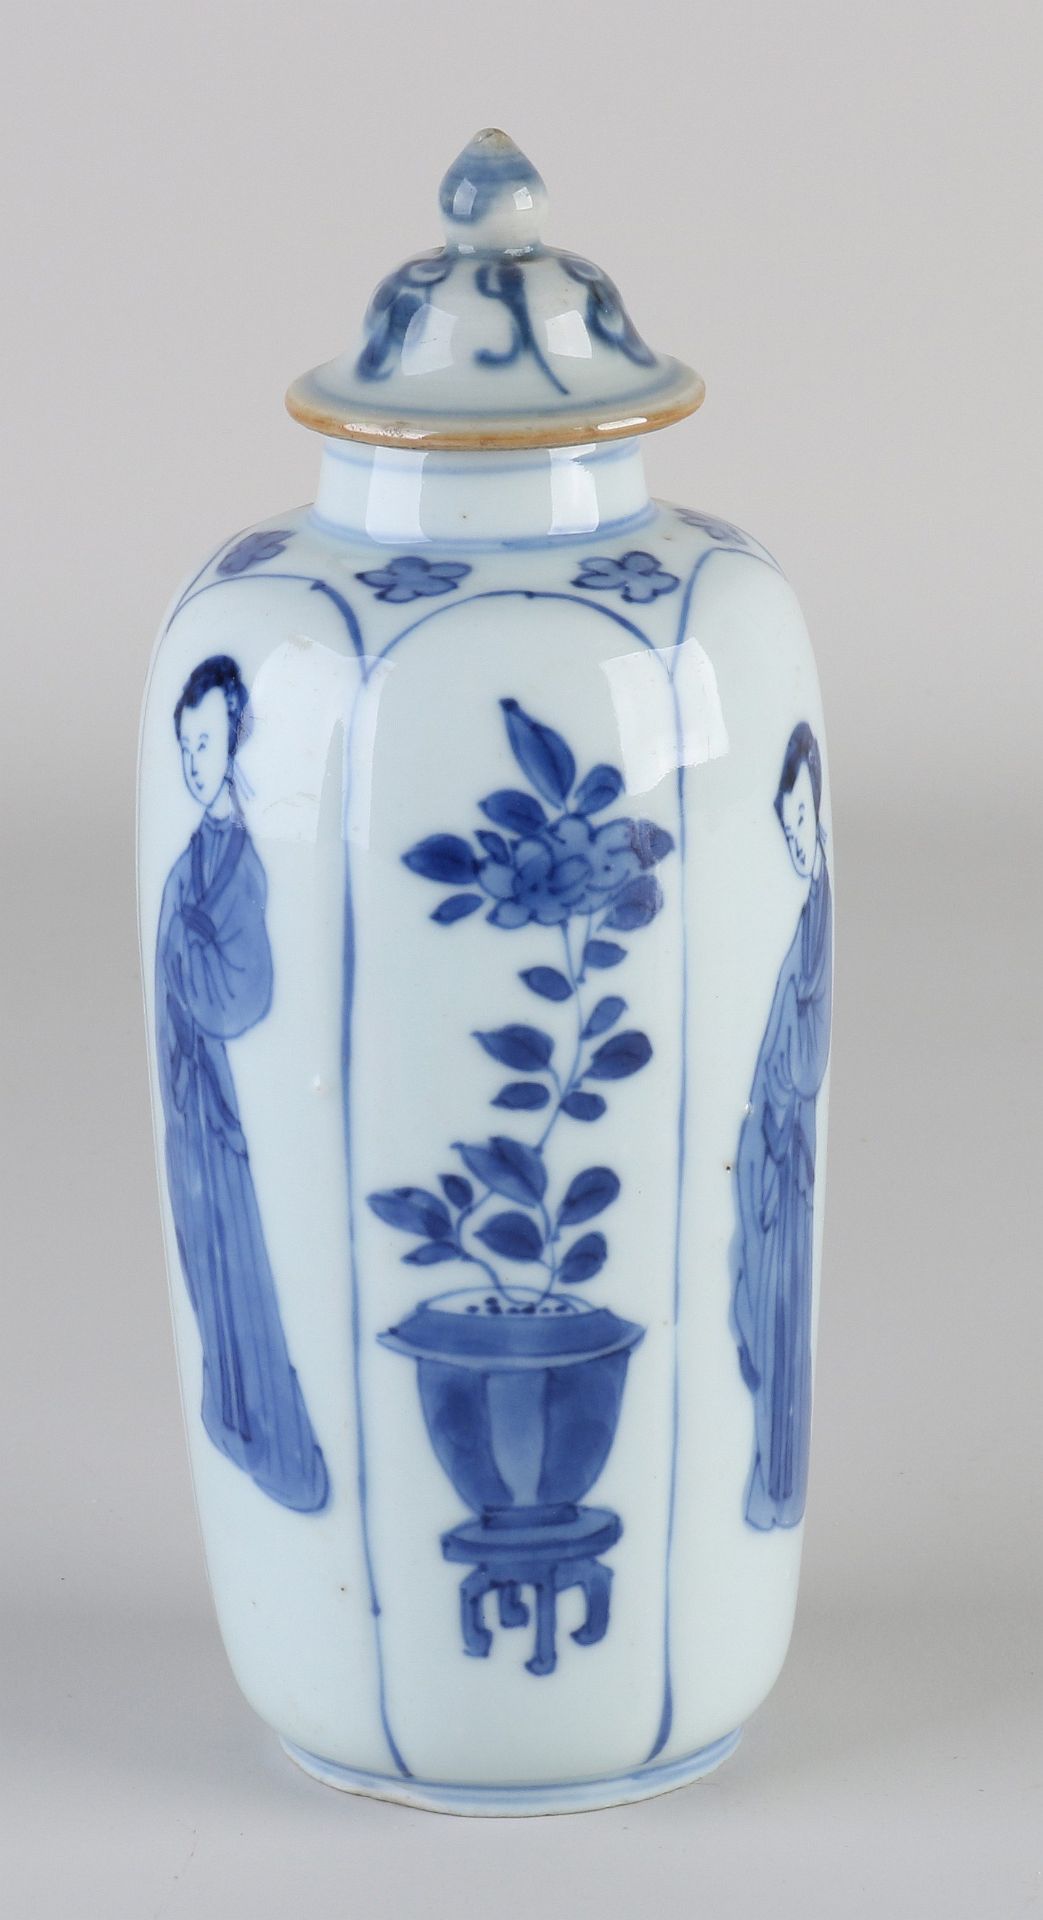 17th - 18th century Kang Xi vase with lid, H 17.5 cm. - Image 2 of 3